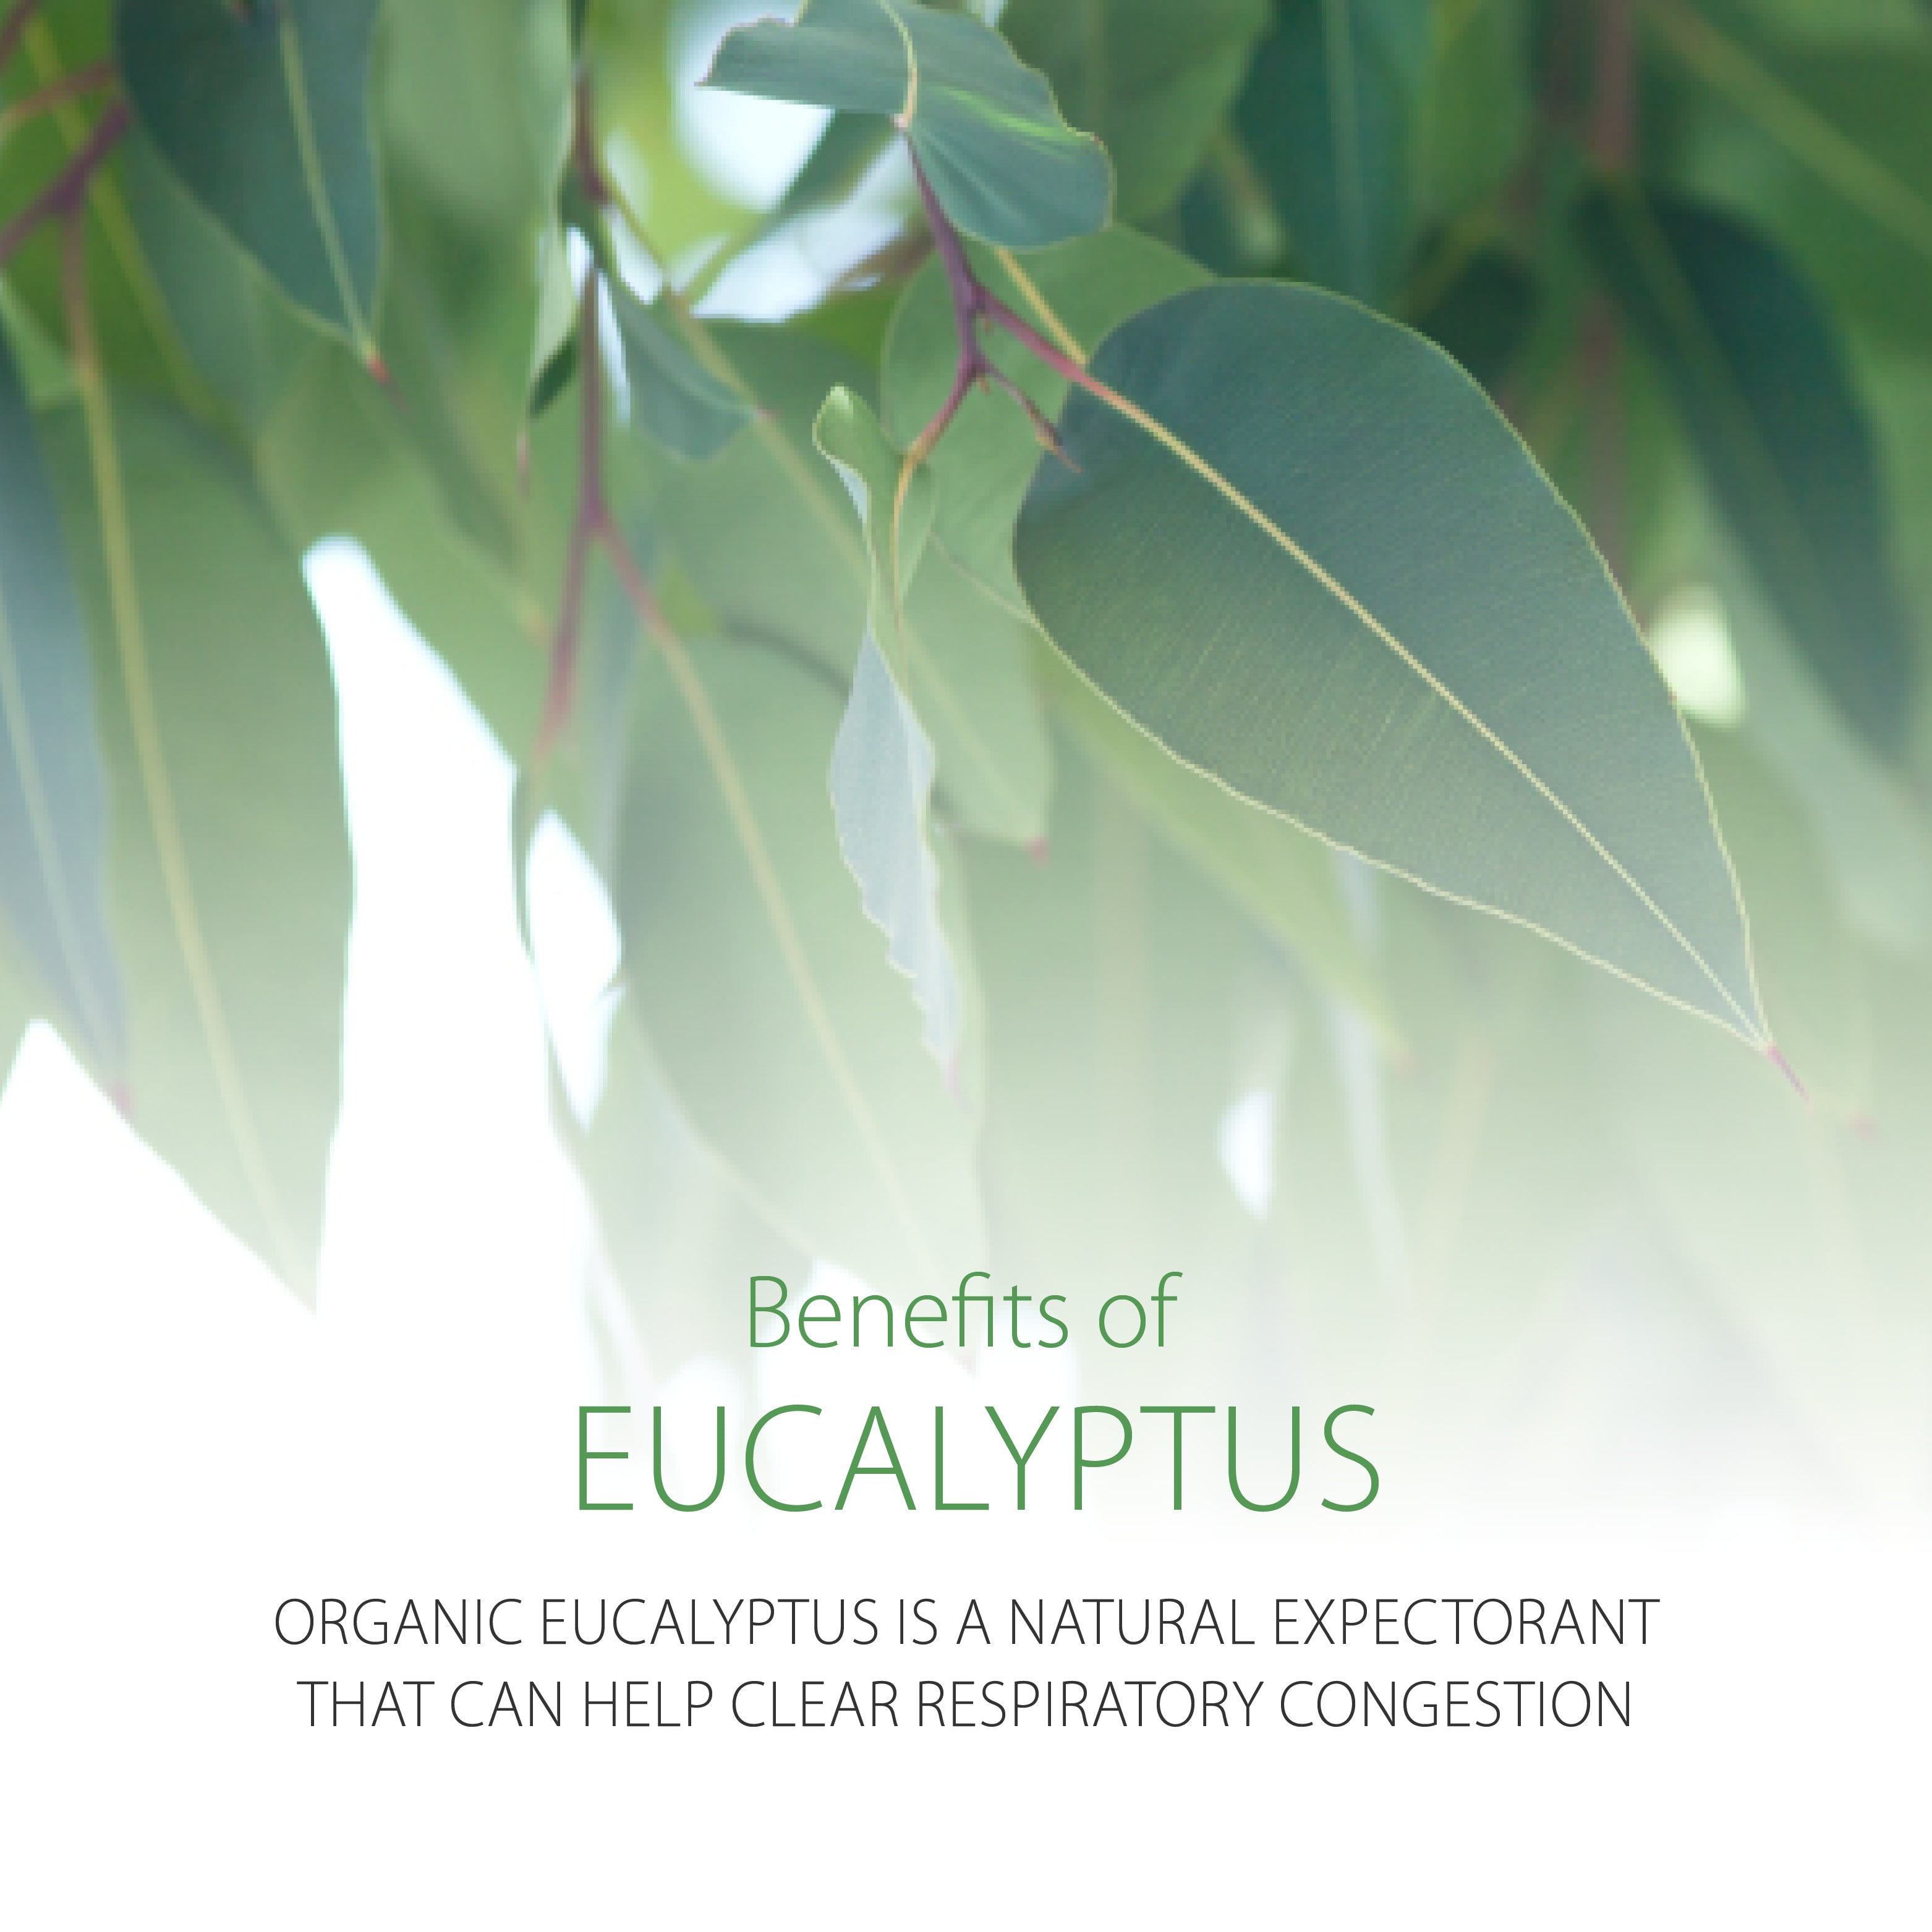 Pittapatta Chest Stick is made with organic eucalyptus a natural expectorant that can help clear respiratory congestion